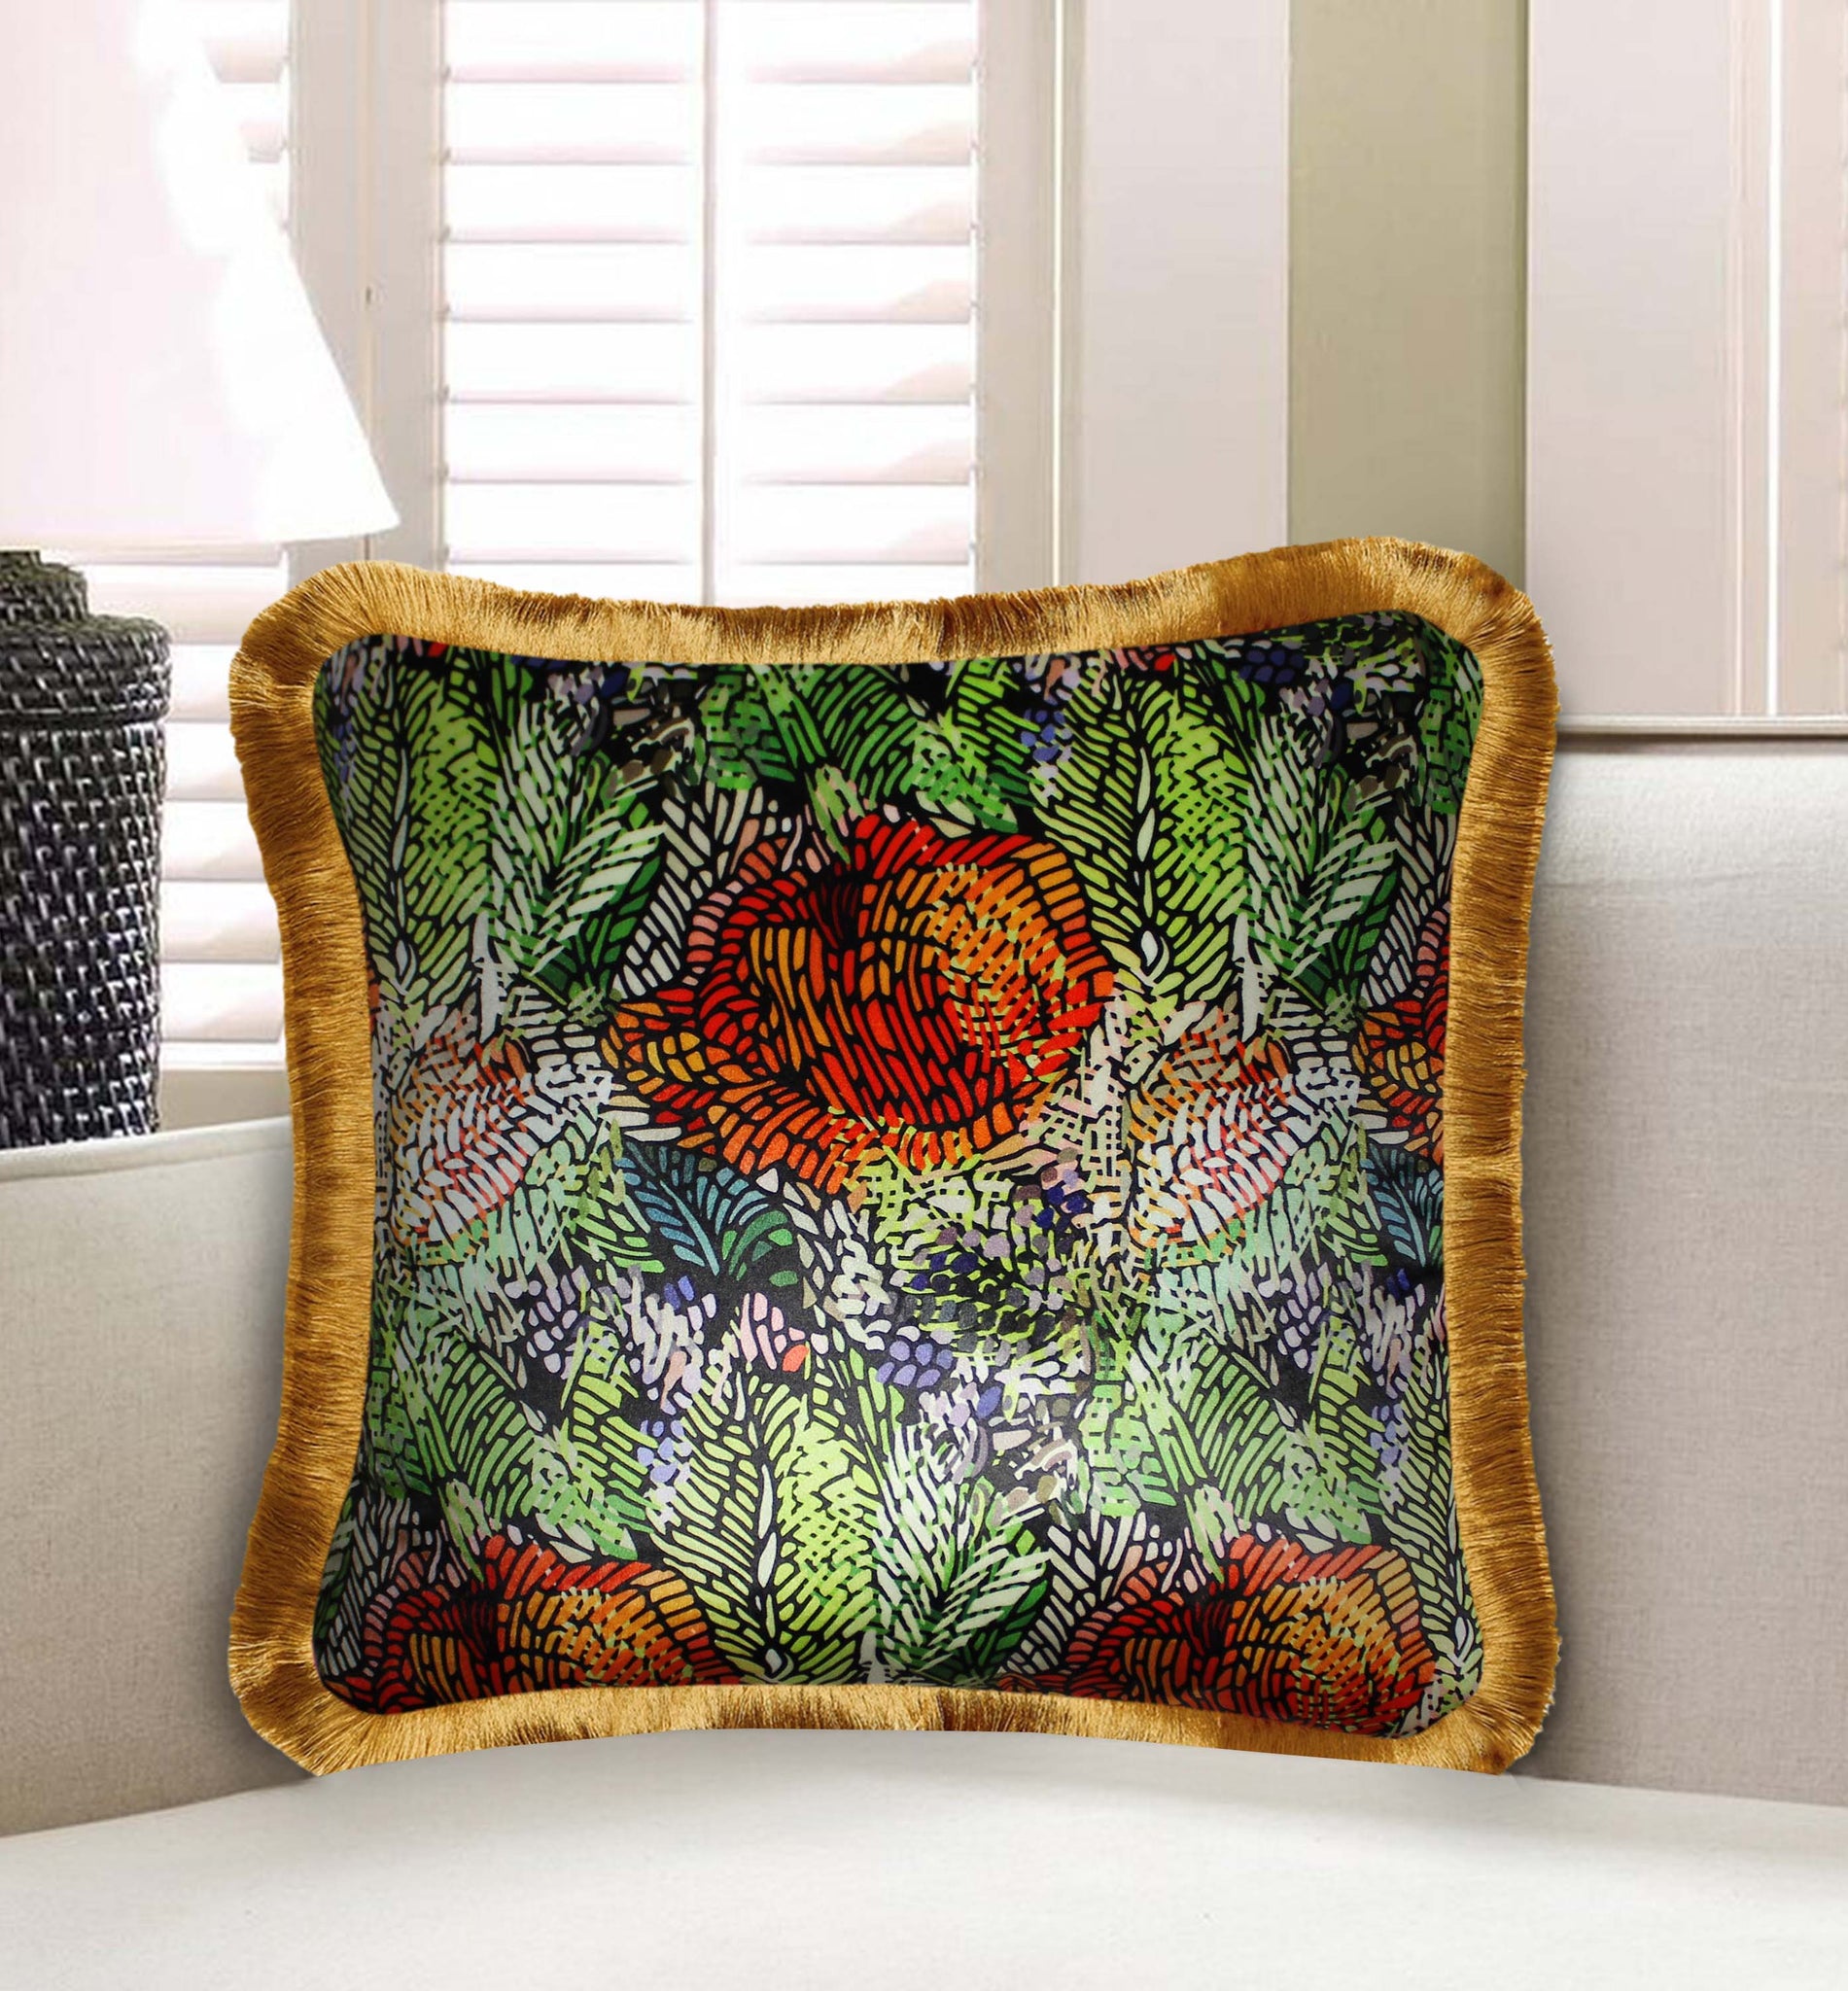  Velvet Cushion Cover Exotic Flower Decorative pillowcase Home Decor Abstract Floral Décor Throw Pillow for Sofa Chair Bedroom Living Room Multi Color 45x45cm (18x18 Inches)